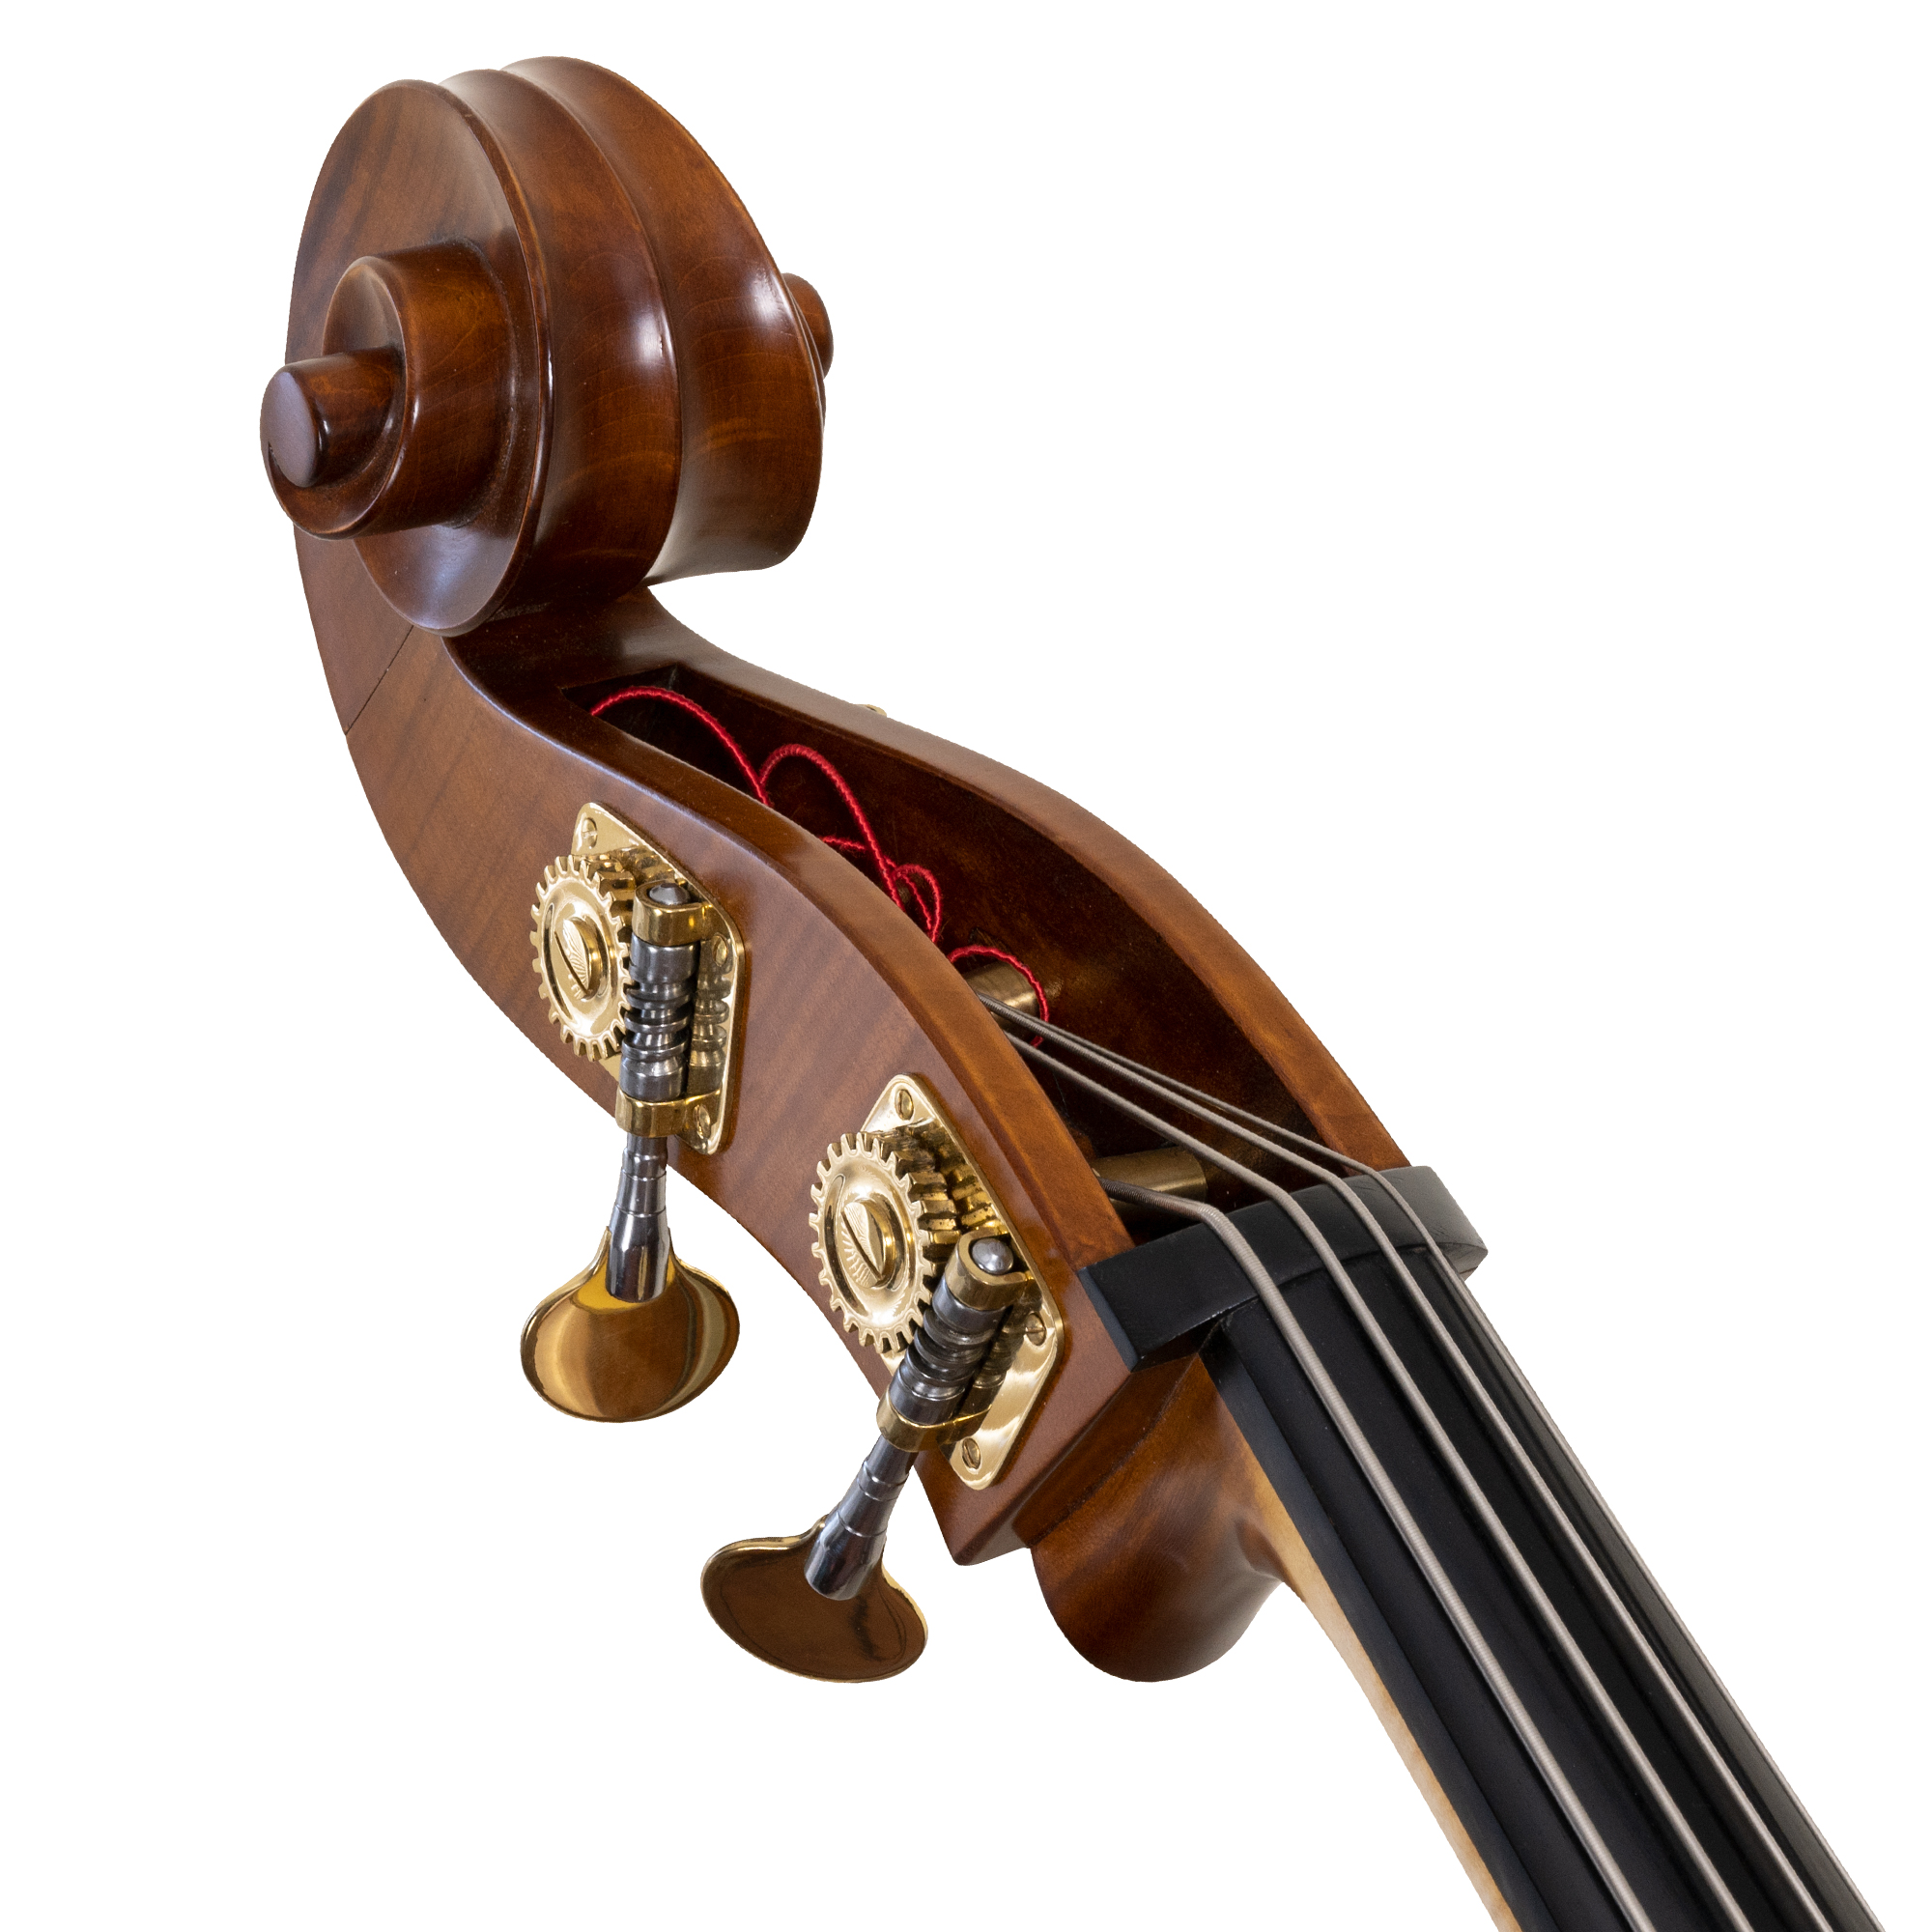 3/4 Rubner Upright Bass in action